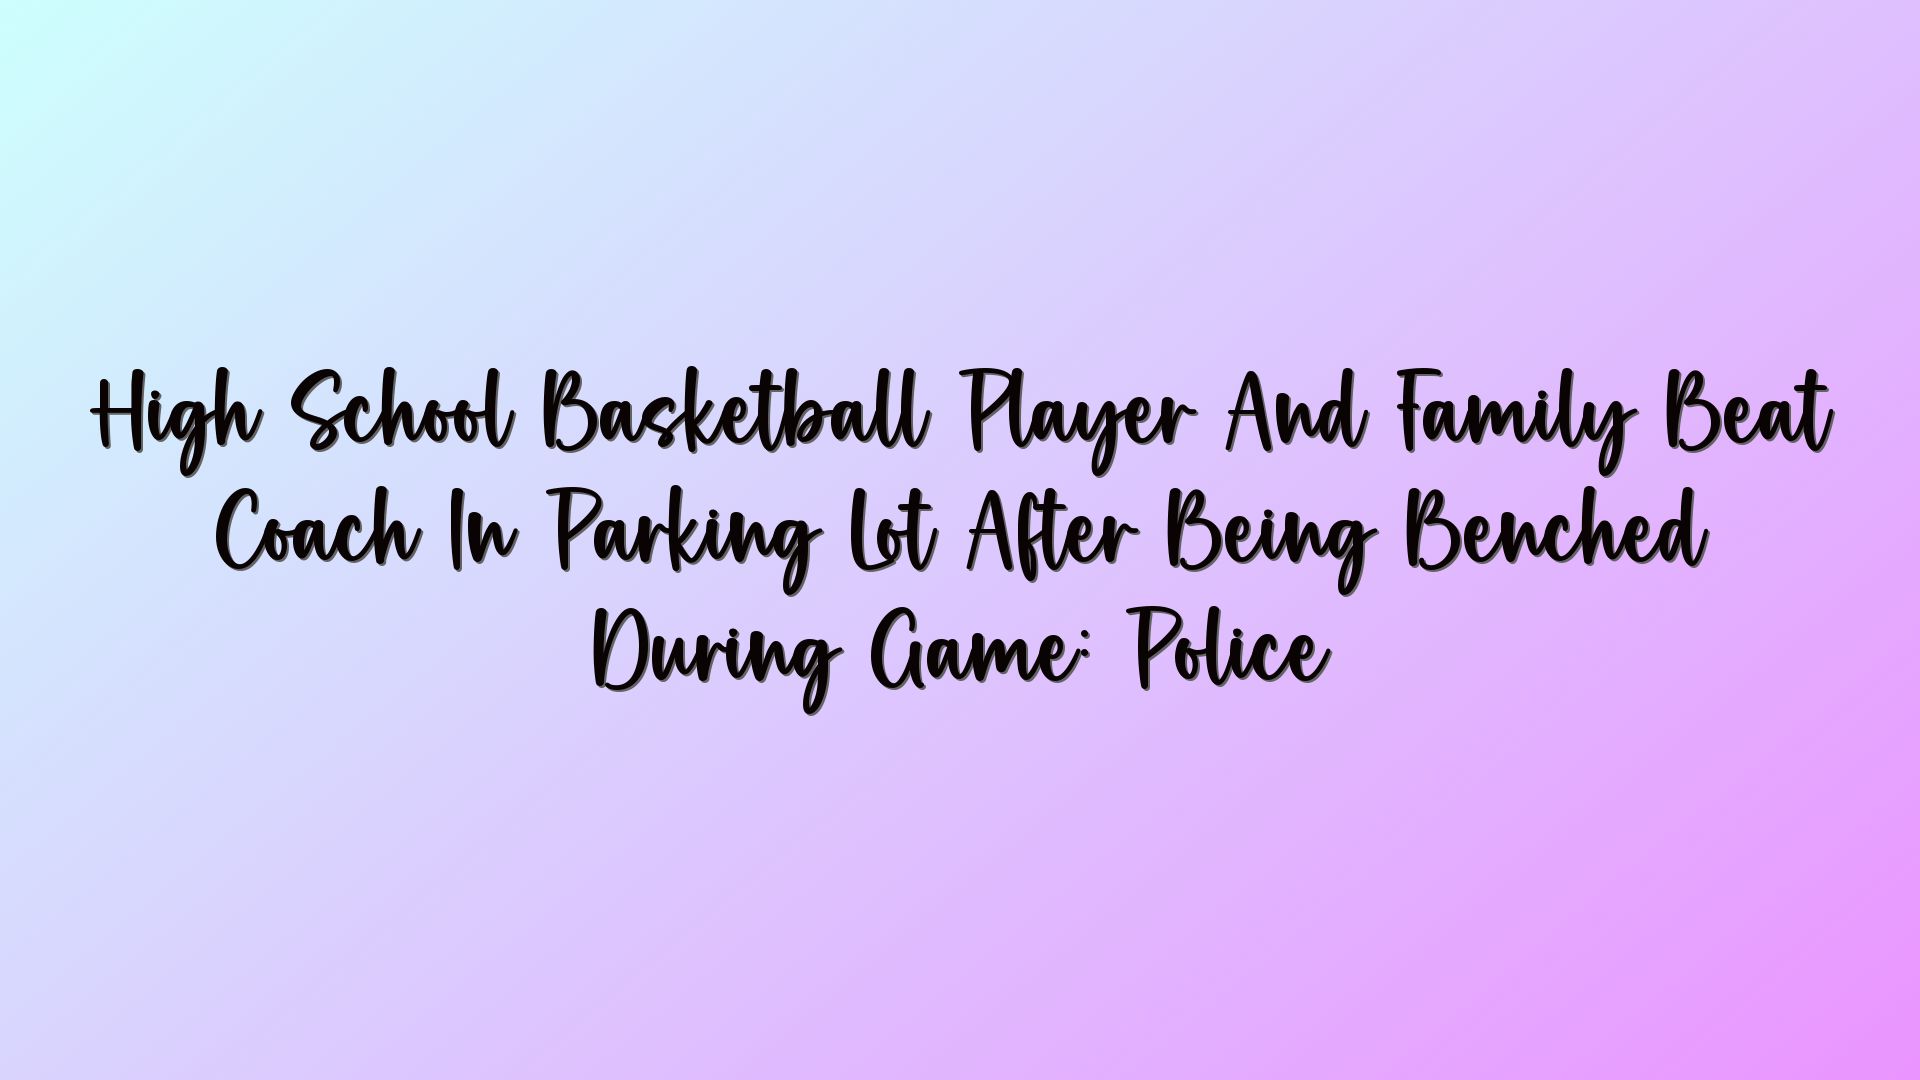 High School Basketball Player And Family Beat Coach In Parking Lot After Being Benched During Game: Police